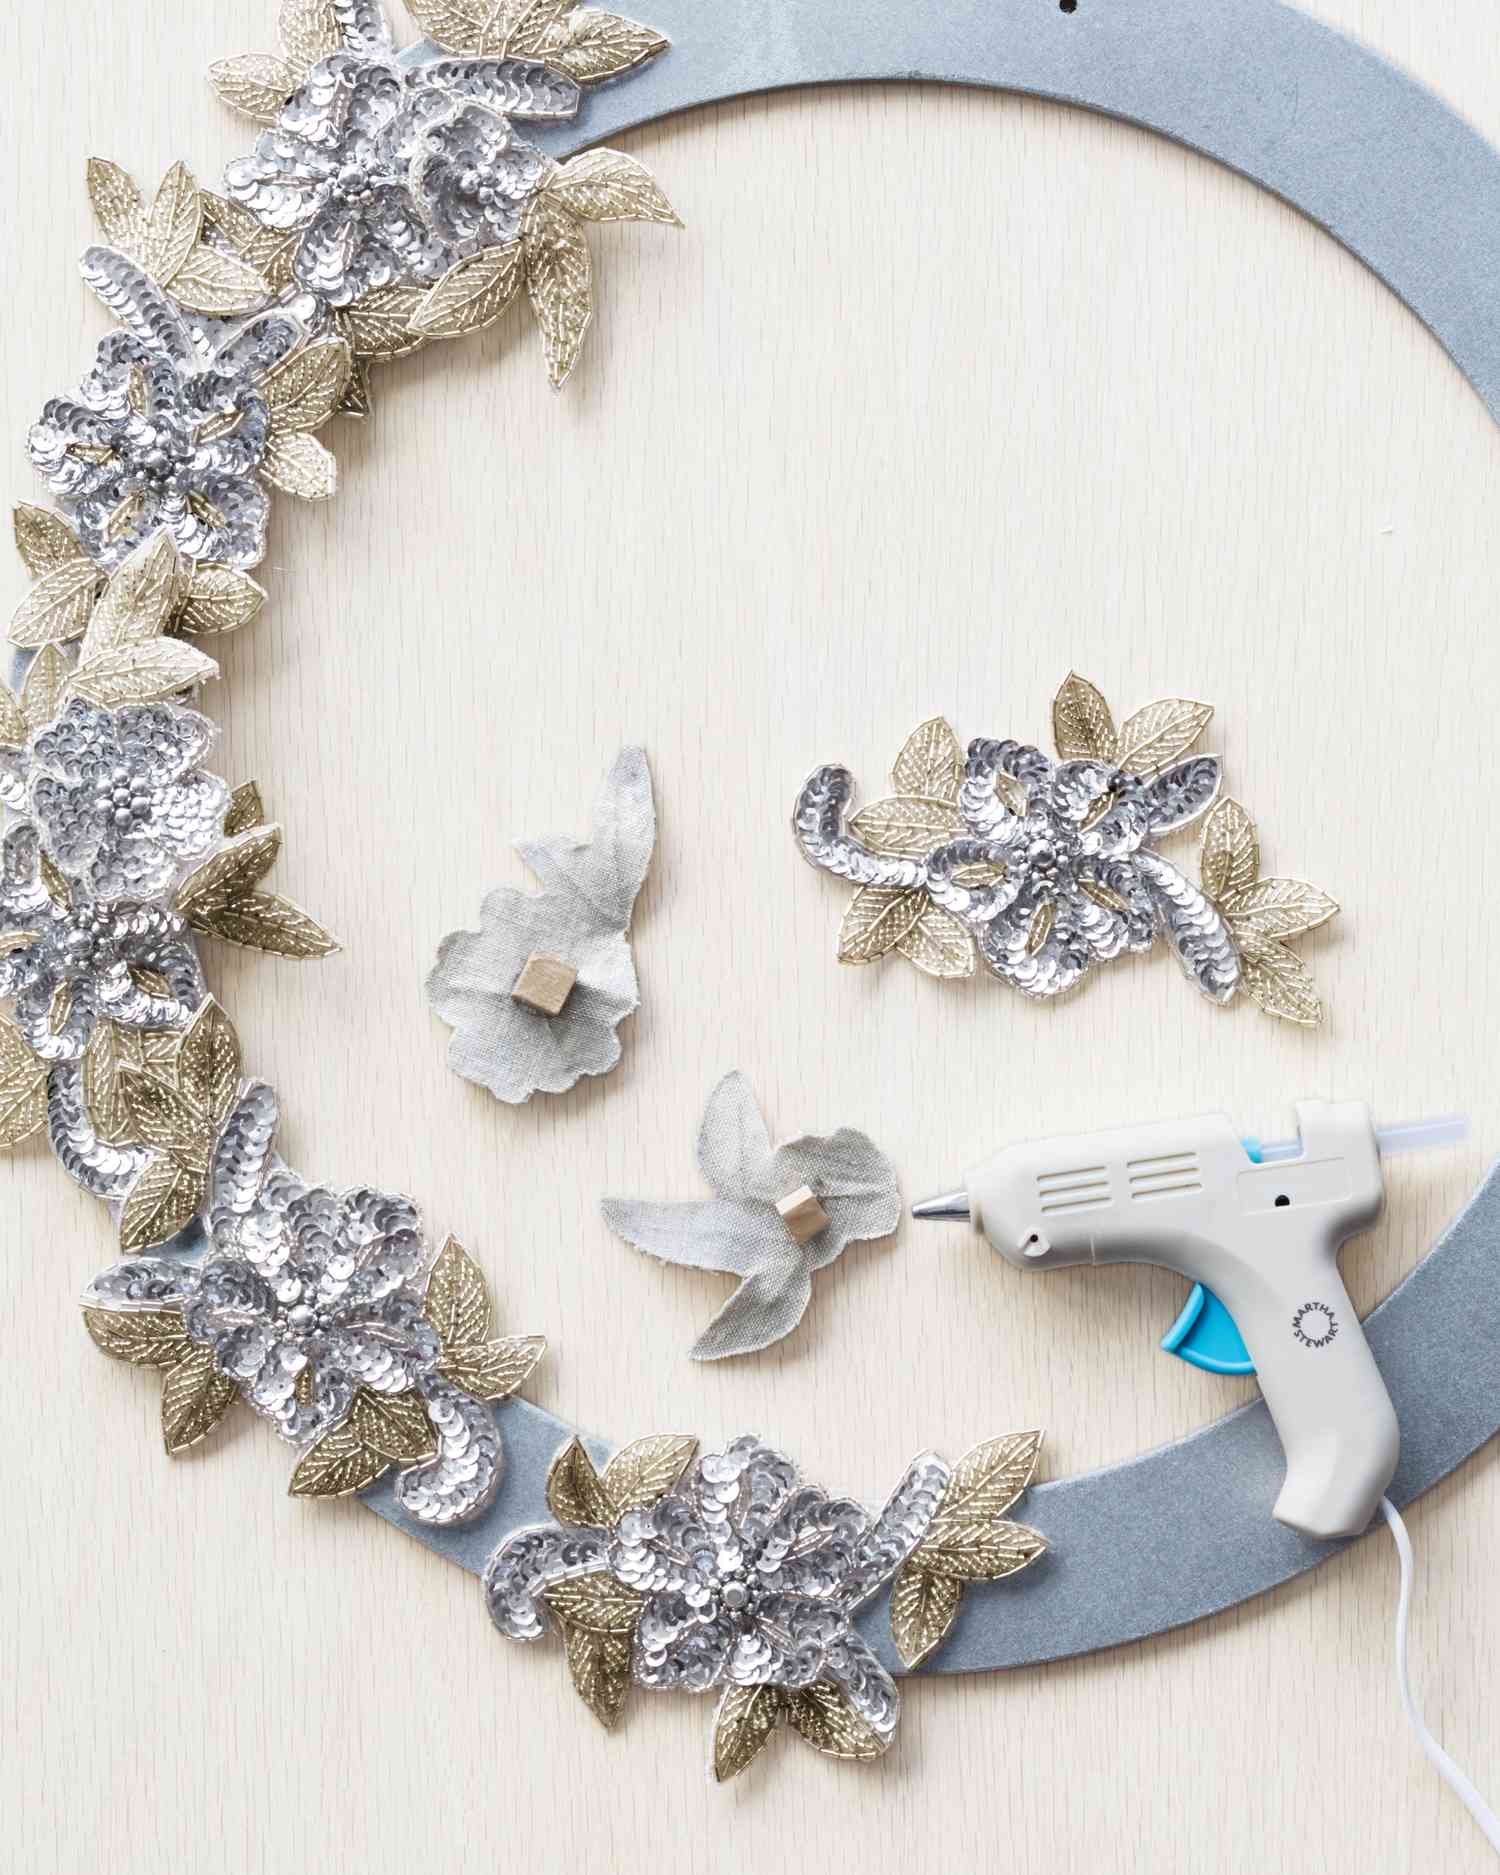 Making a Craft Ring Wreath